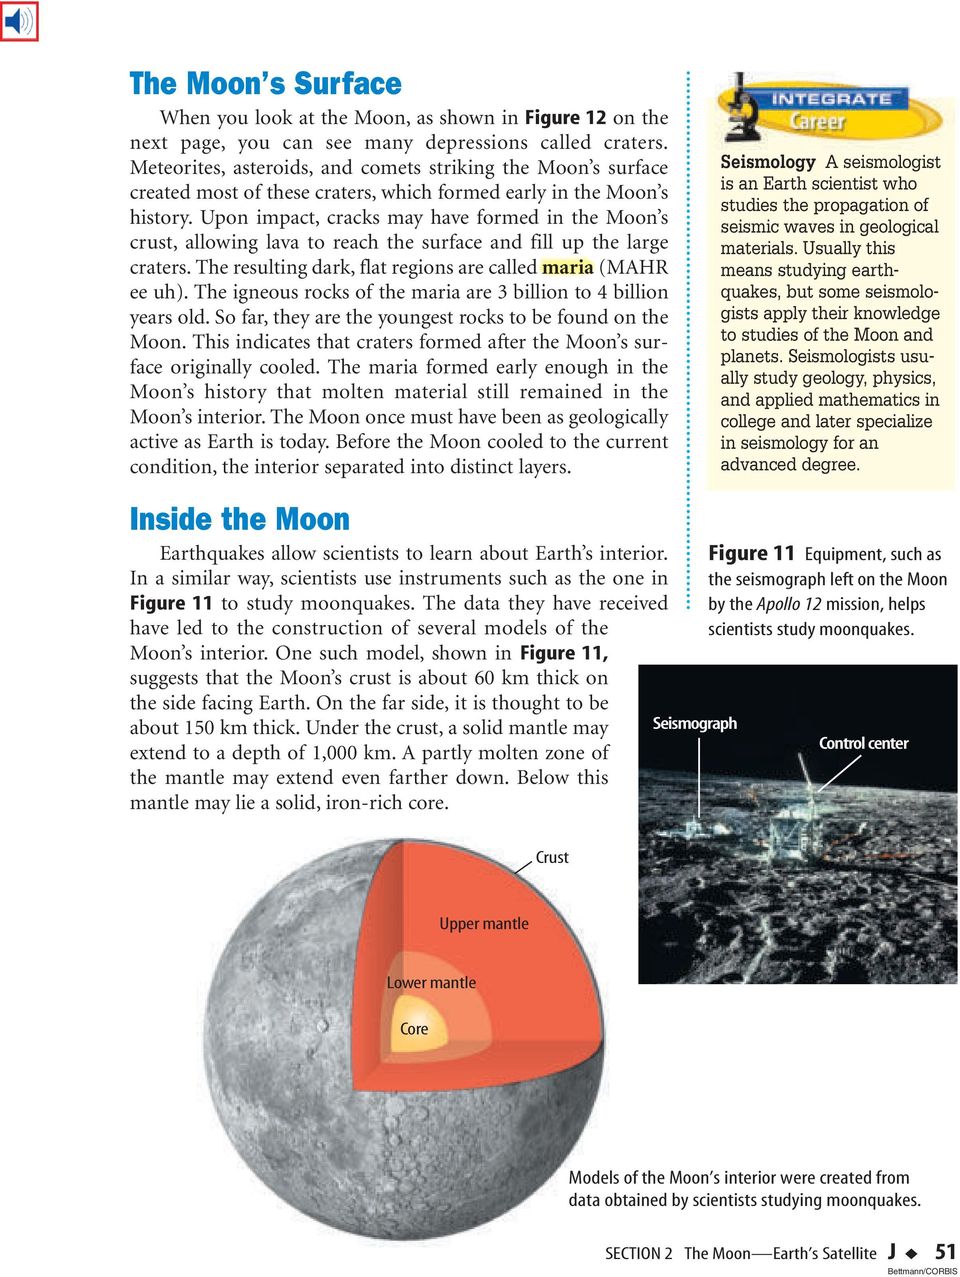 Upon impact, cracks may have formed in the Moon s crust, allowing lava to reach the surface and fill up the large craters. The resulting dark, flat regions are called maria (MAHR ee uh).